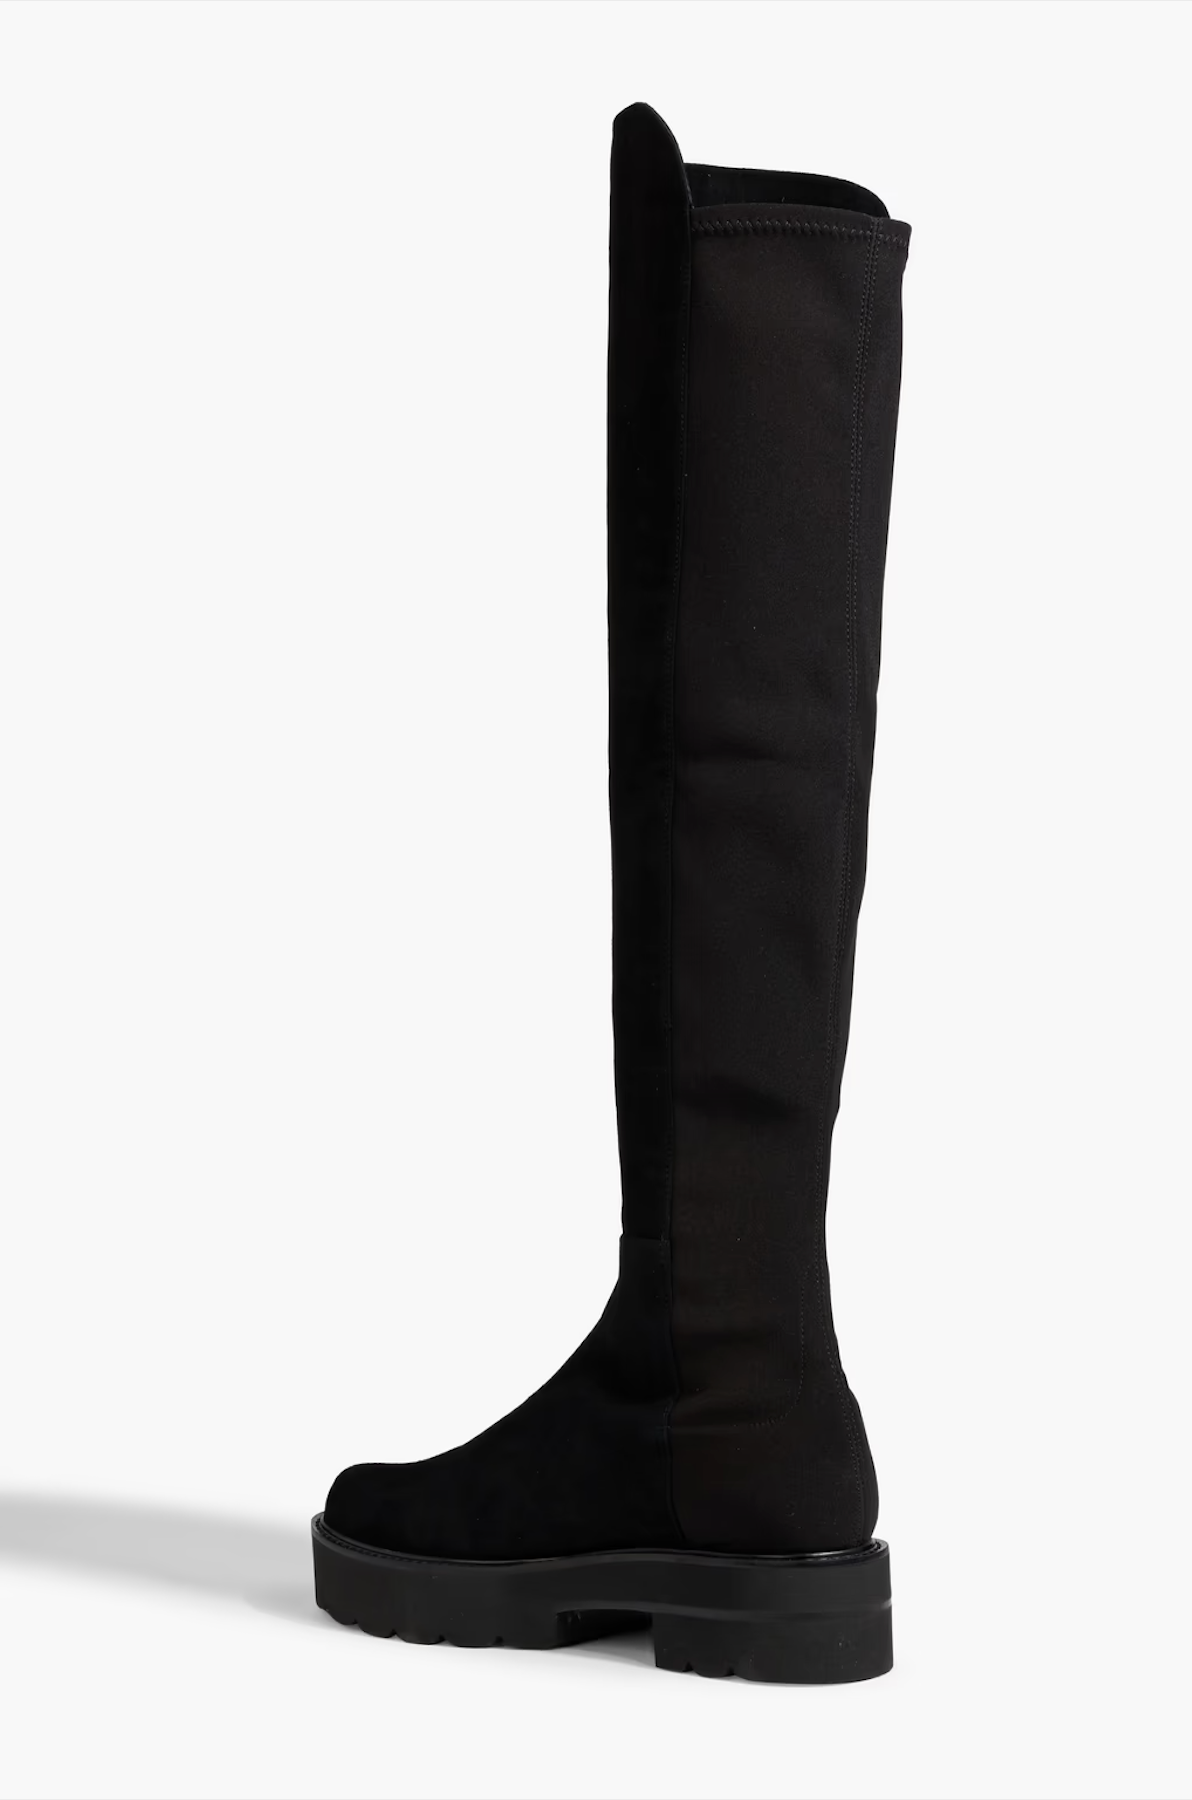 Neoprene and suede over-the-knee boots